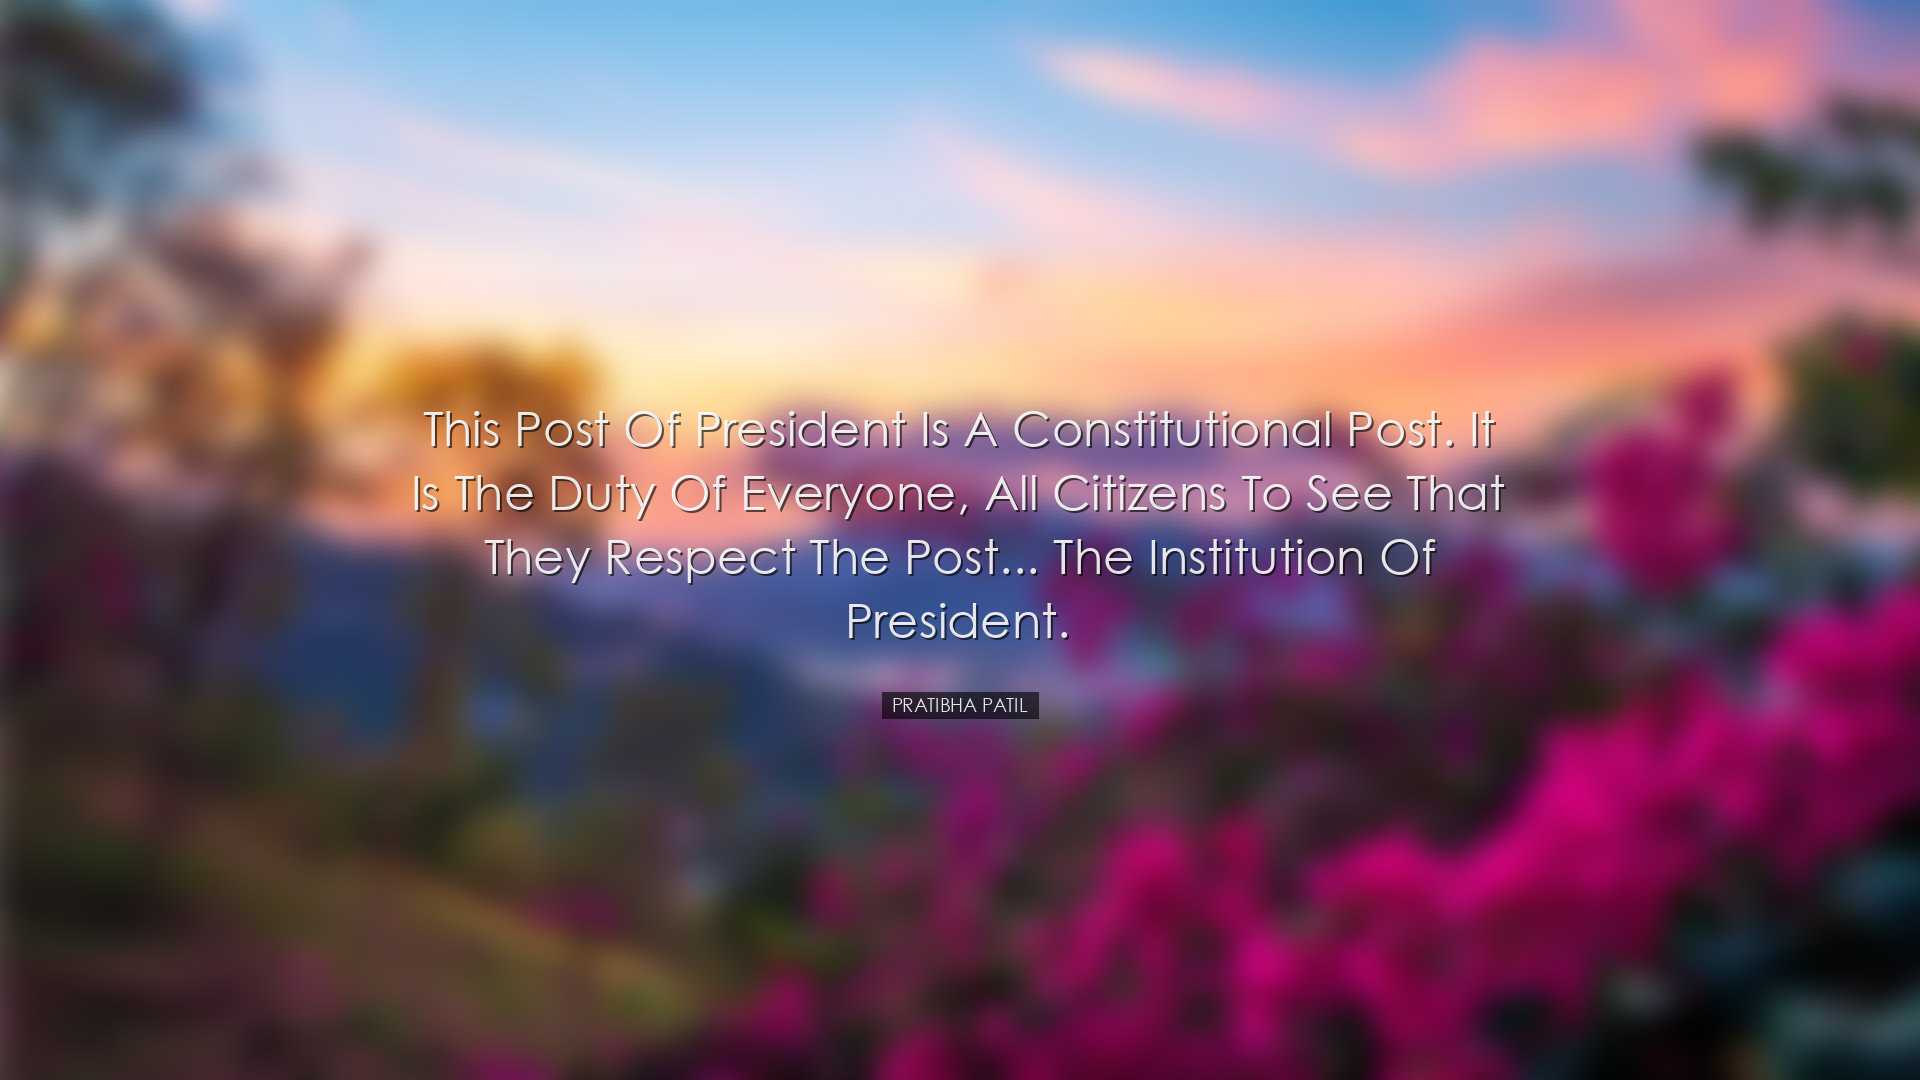 This post of President is a Constitutional post. It is the duty of